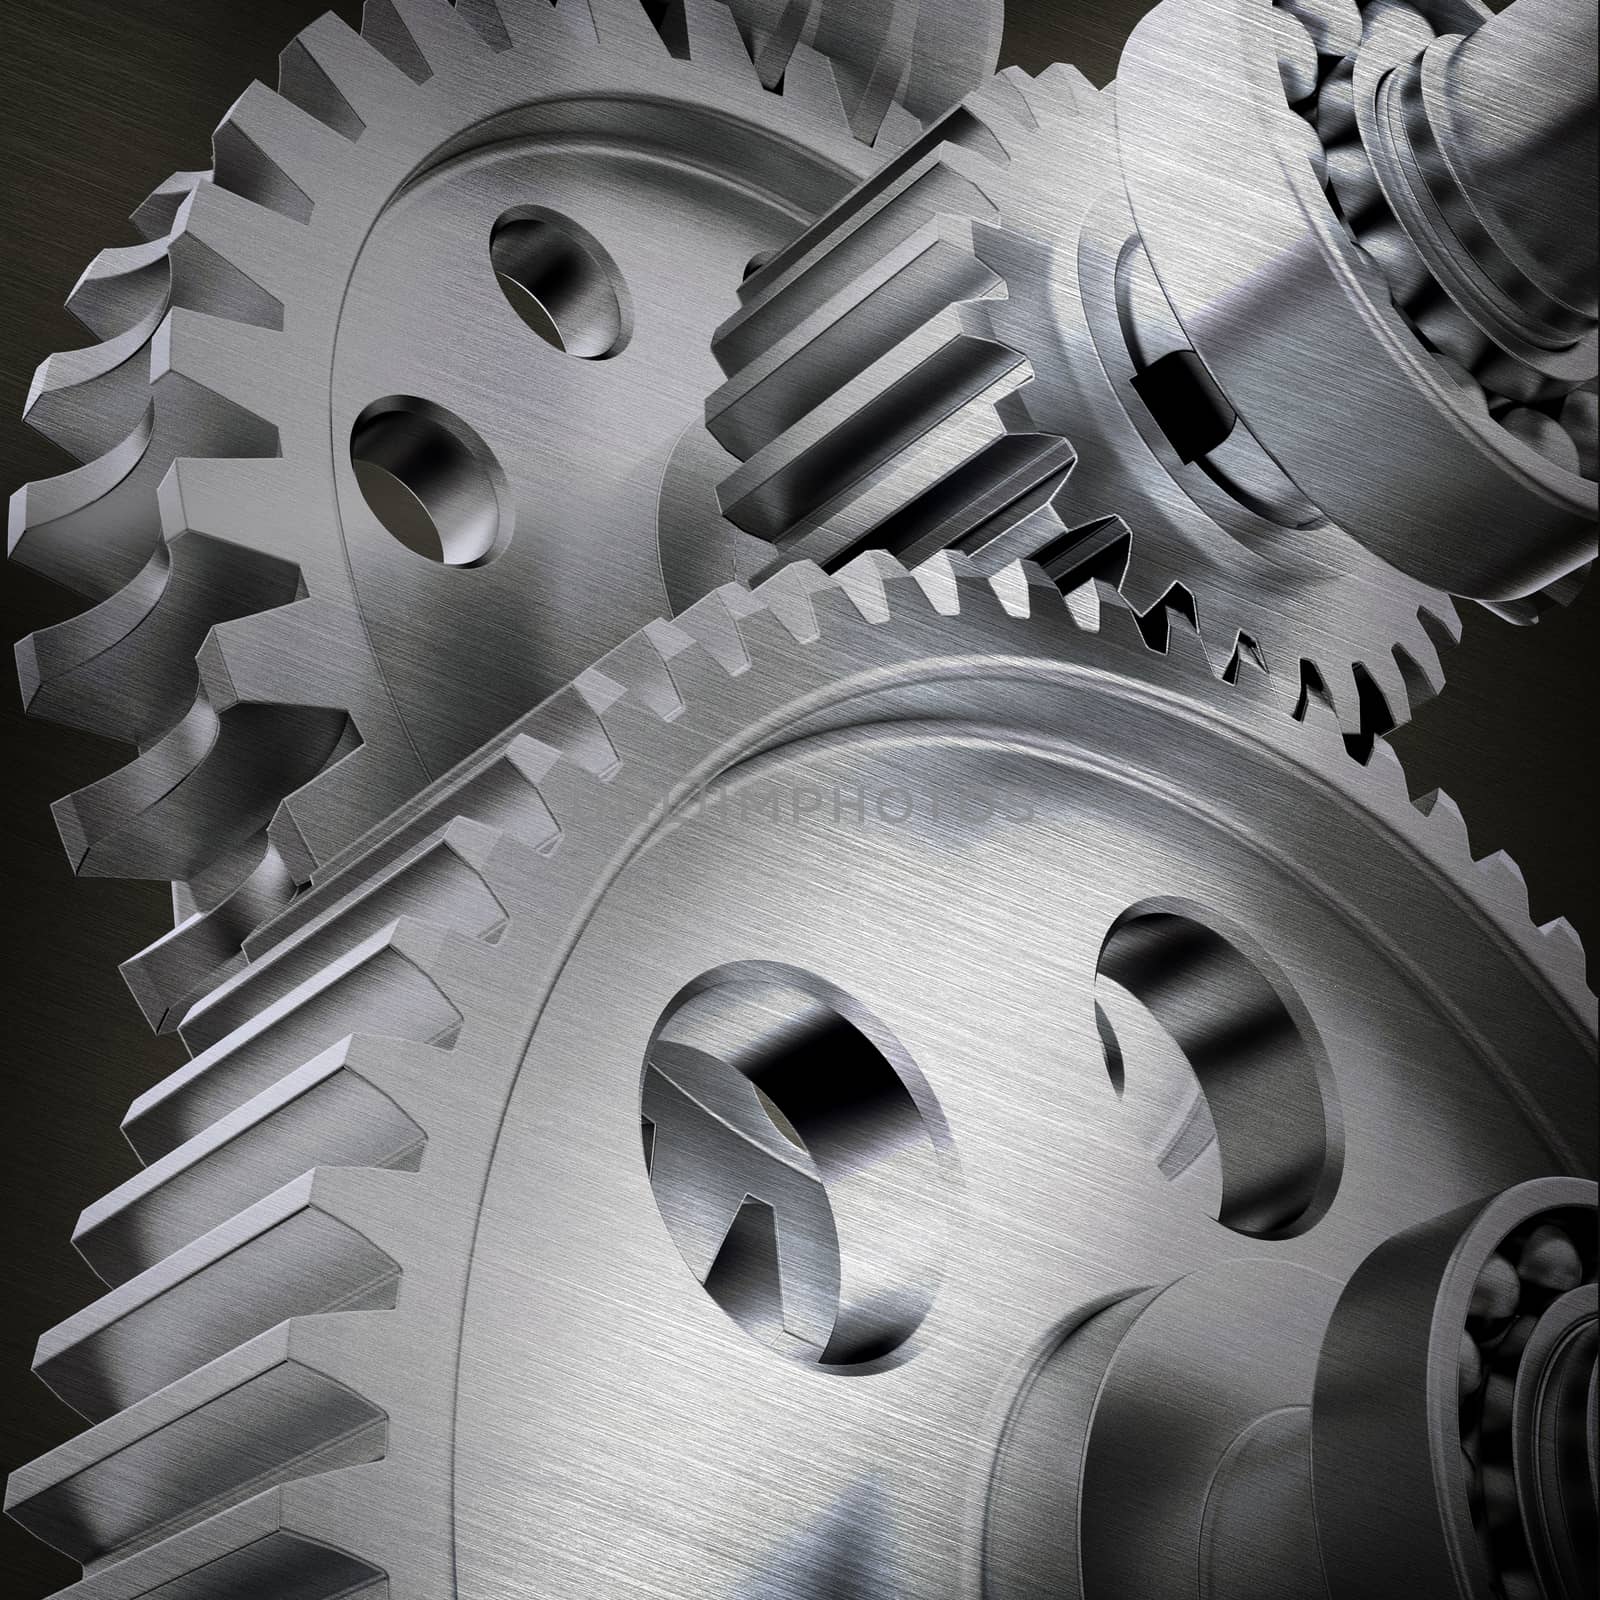 Metal cog gears joining together, close up view